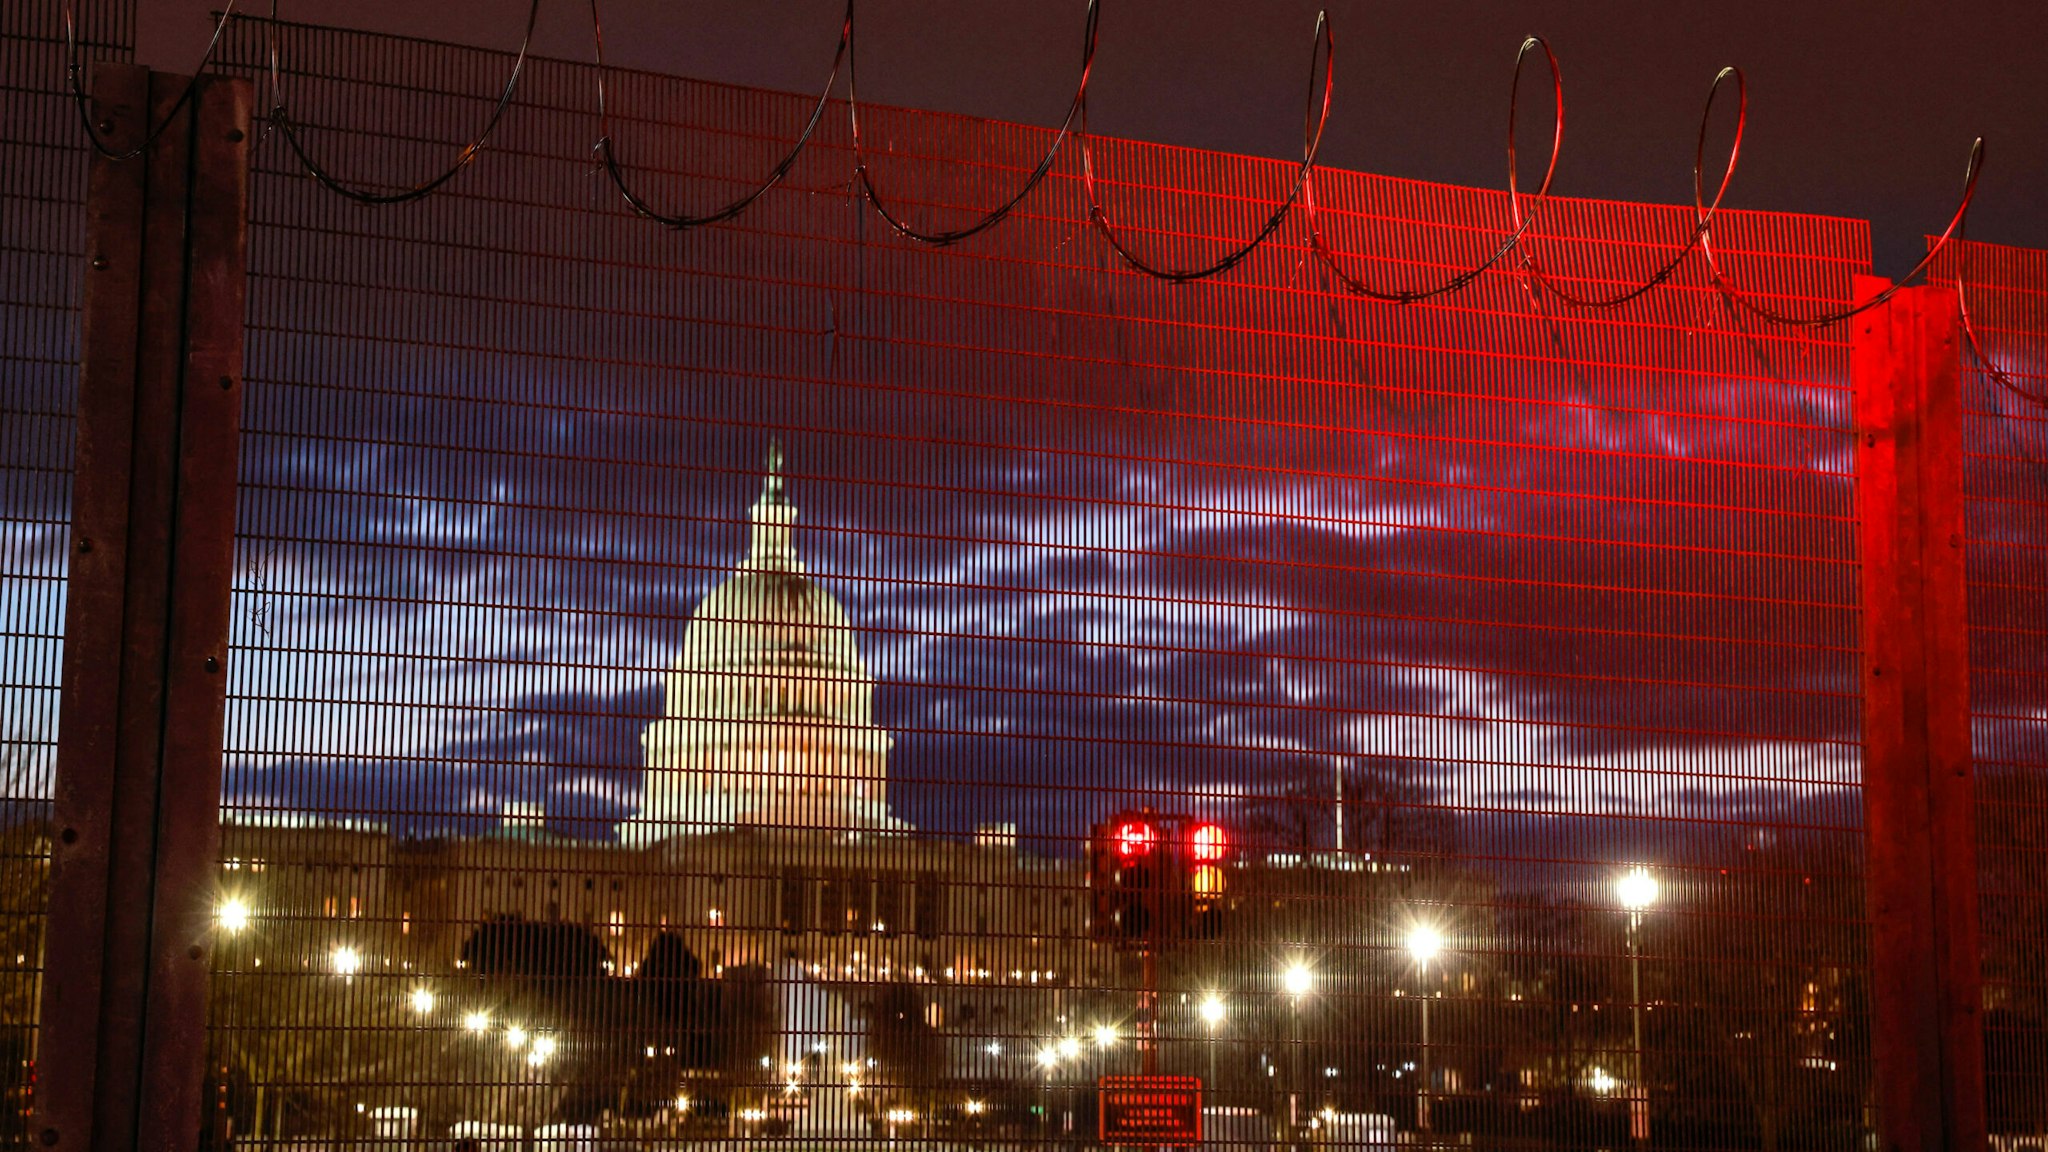 WASHINGTON, DISTRICT OF COLUMBIA, UNITED STATES - 2021/01/23: Razor wire and fences still surround the United States Capitol building at sunrise a few days after the inauguration of President Joe Biden and Vice President Kamala Harris. The Capitol was breached during an insurrection January 6 just days before the inauguration.